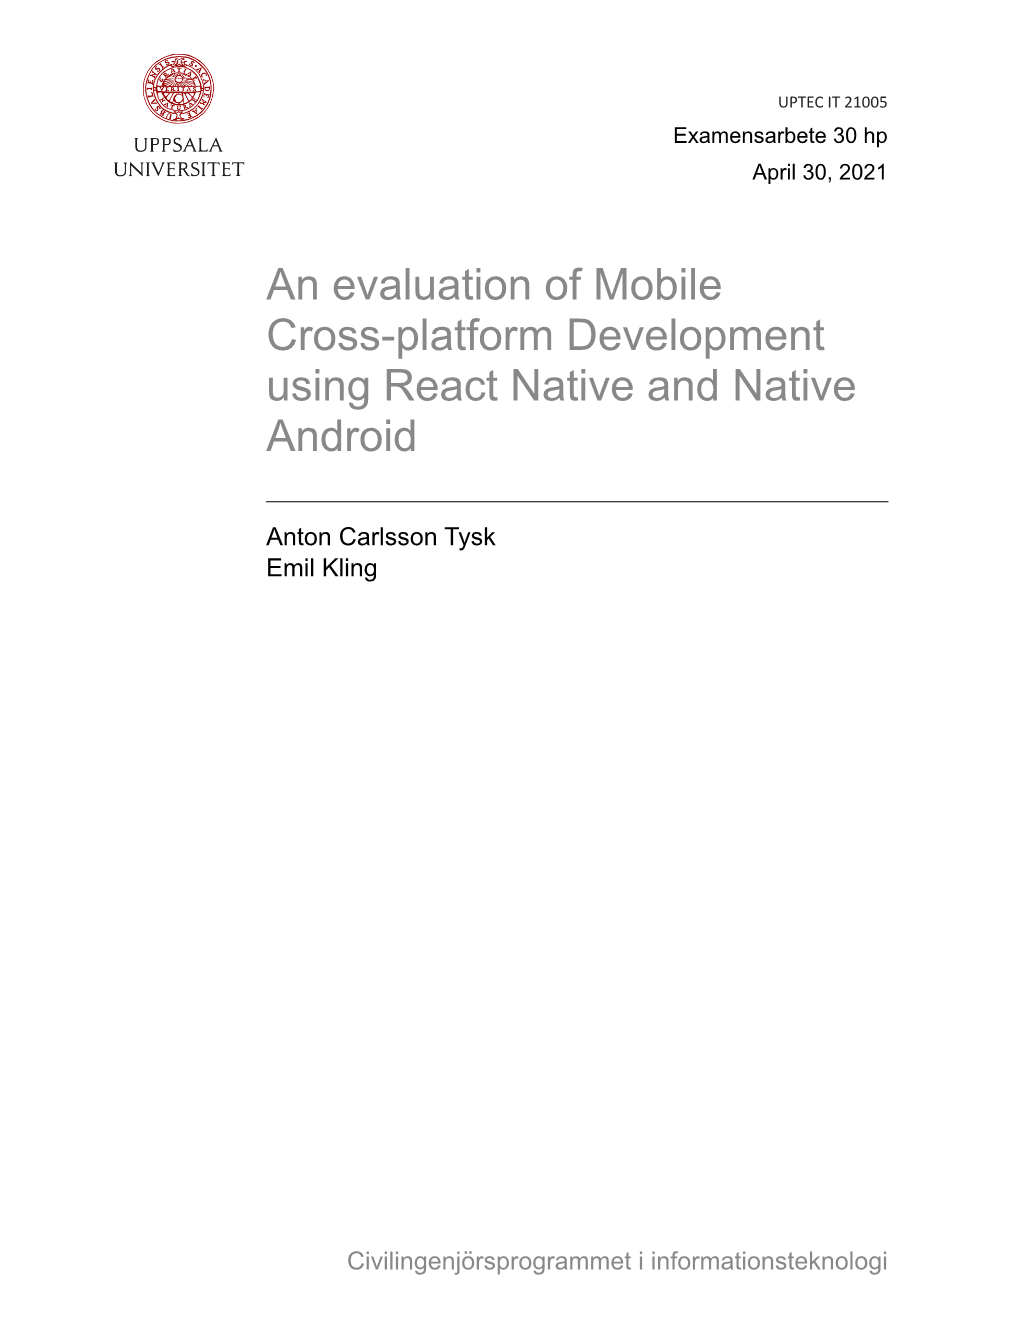 An Evaluation of Mobile Cross-Platform Development Using React Native and Native Android